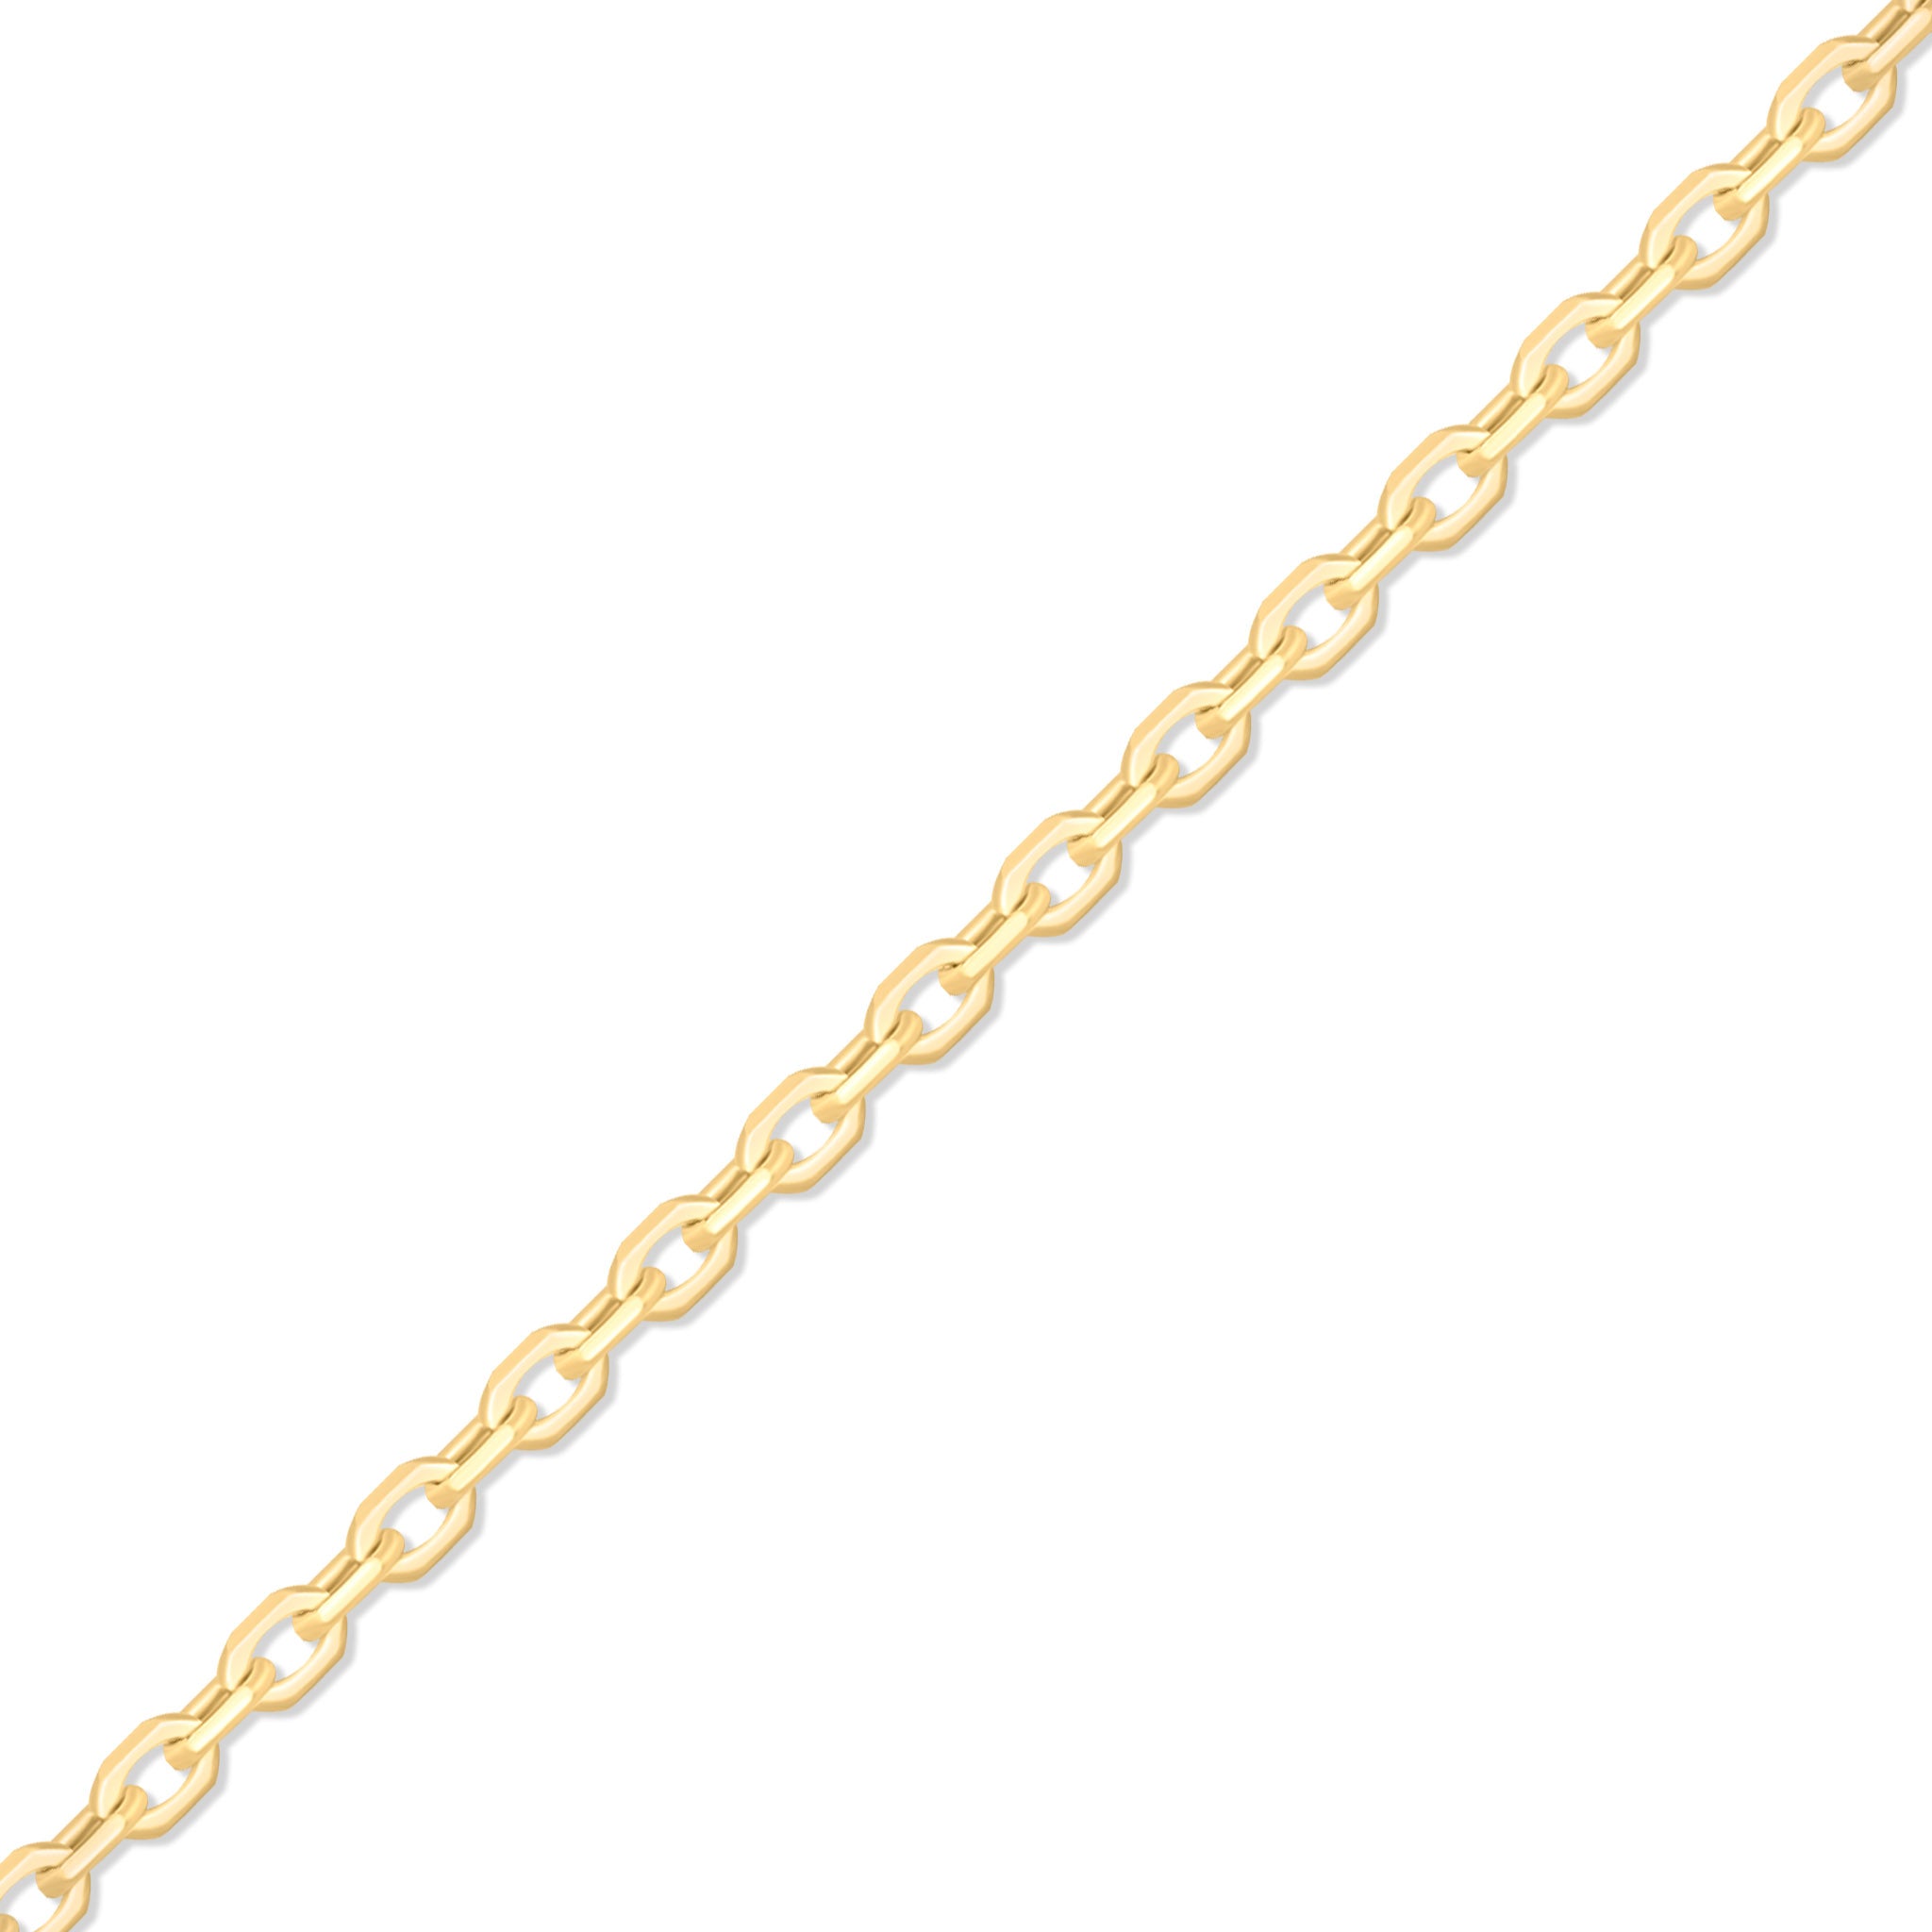 0.9mm Fine Diamond Cut Cable 14K Solid Gold Permanent Jewelry Chain - By the Inch / PMJ0002